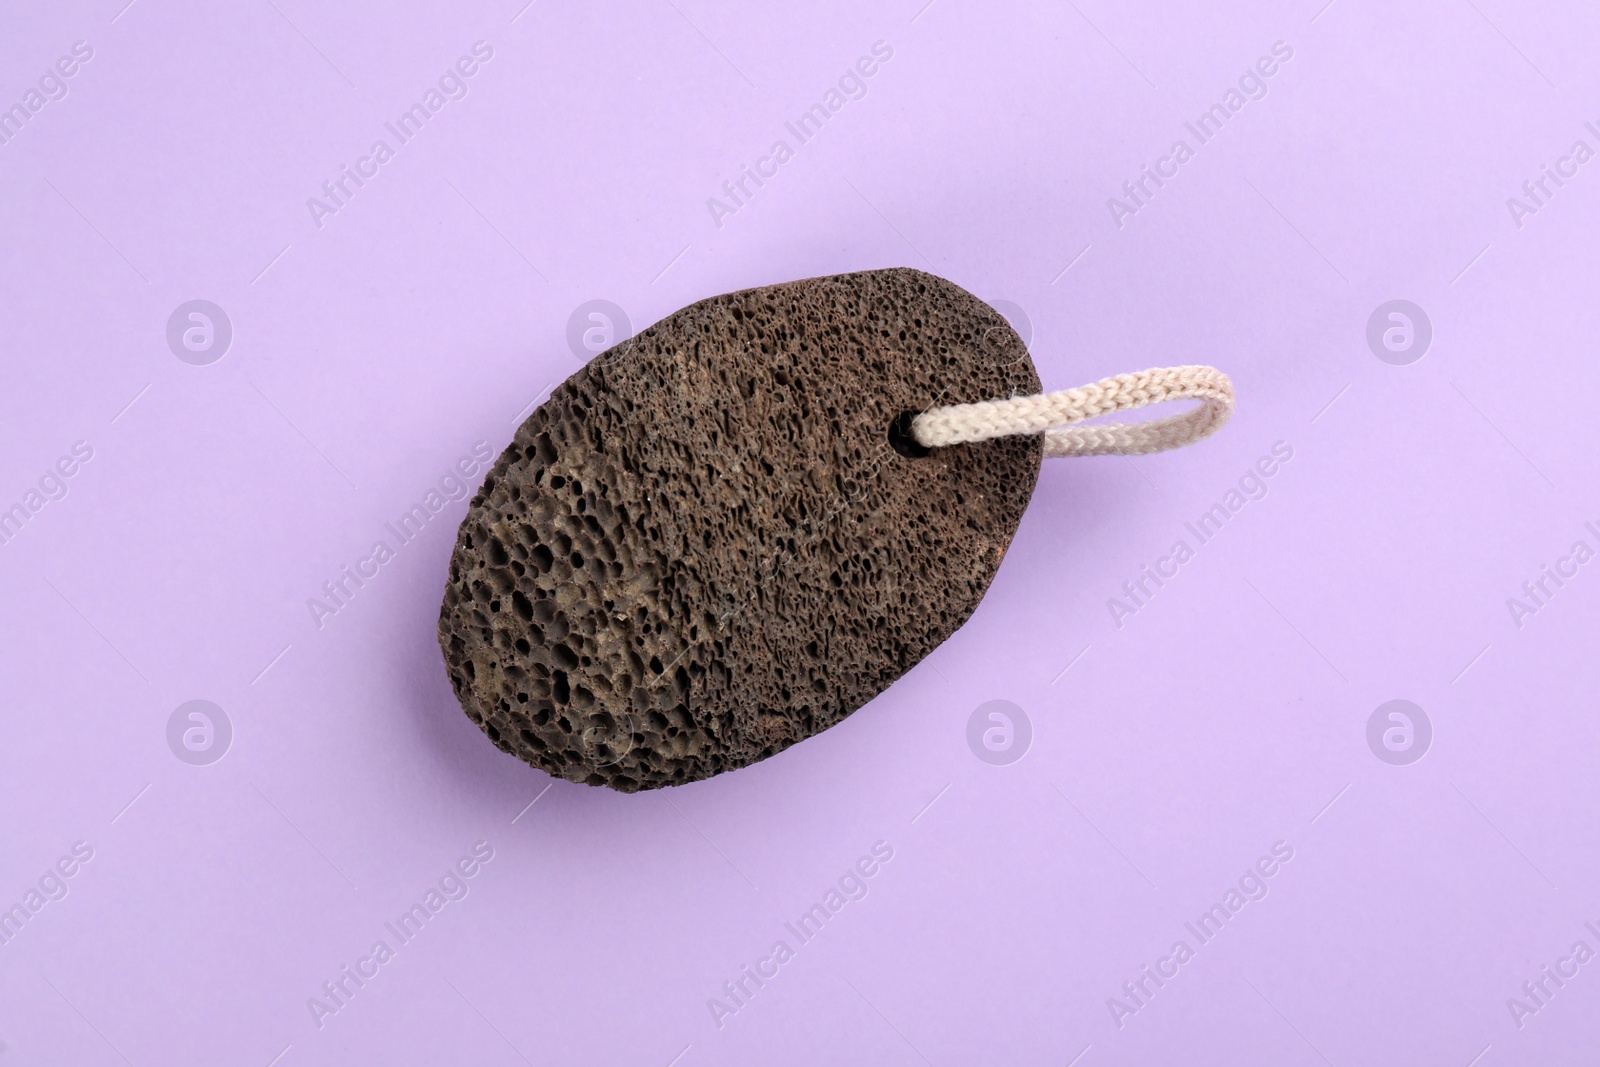 Photo of Pumice stone on violet background, top view